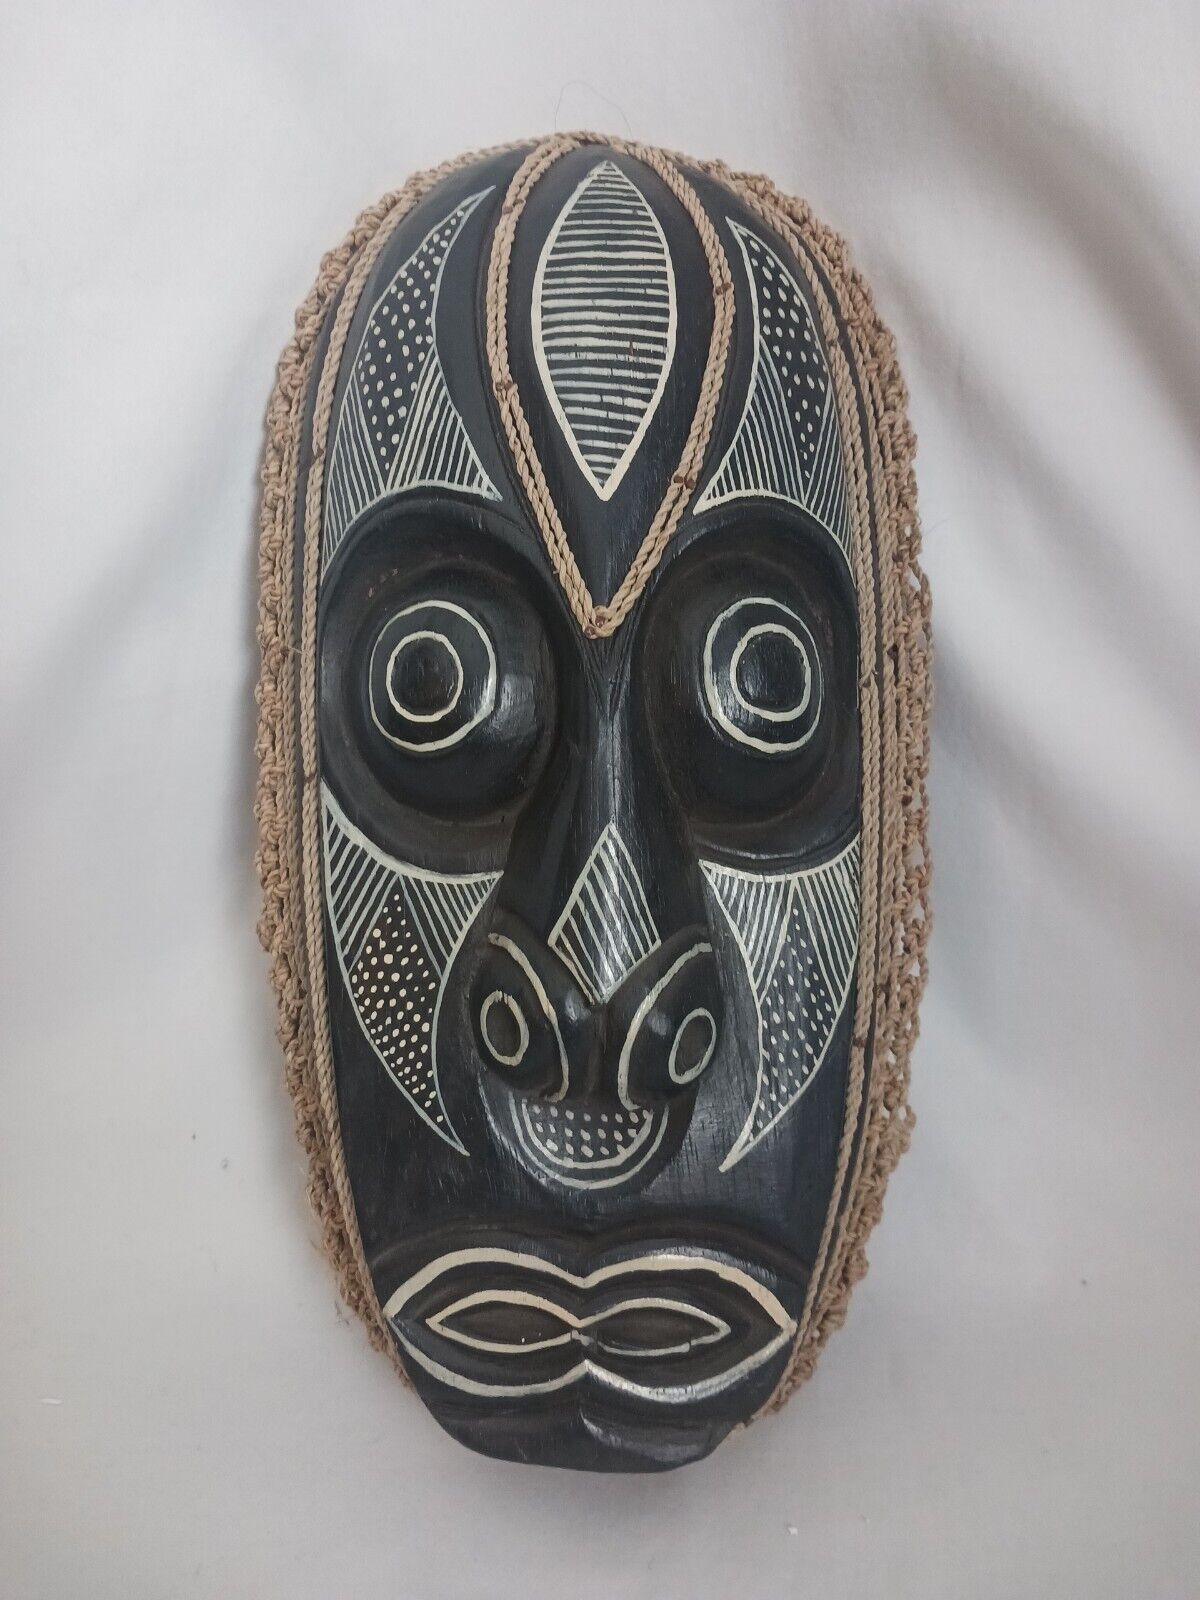 African Tribal Face Mask 14x8, Wood Hand Carved,Wall Hanging Style.